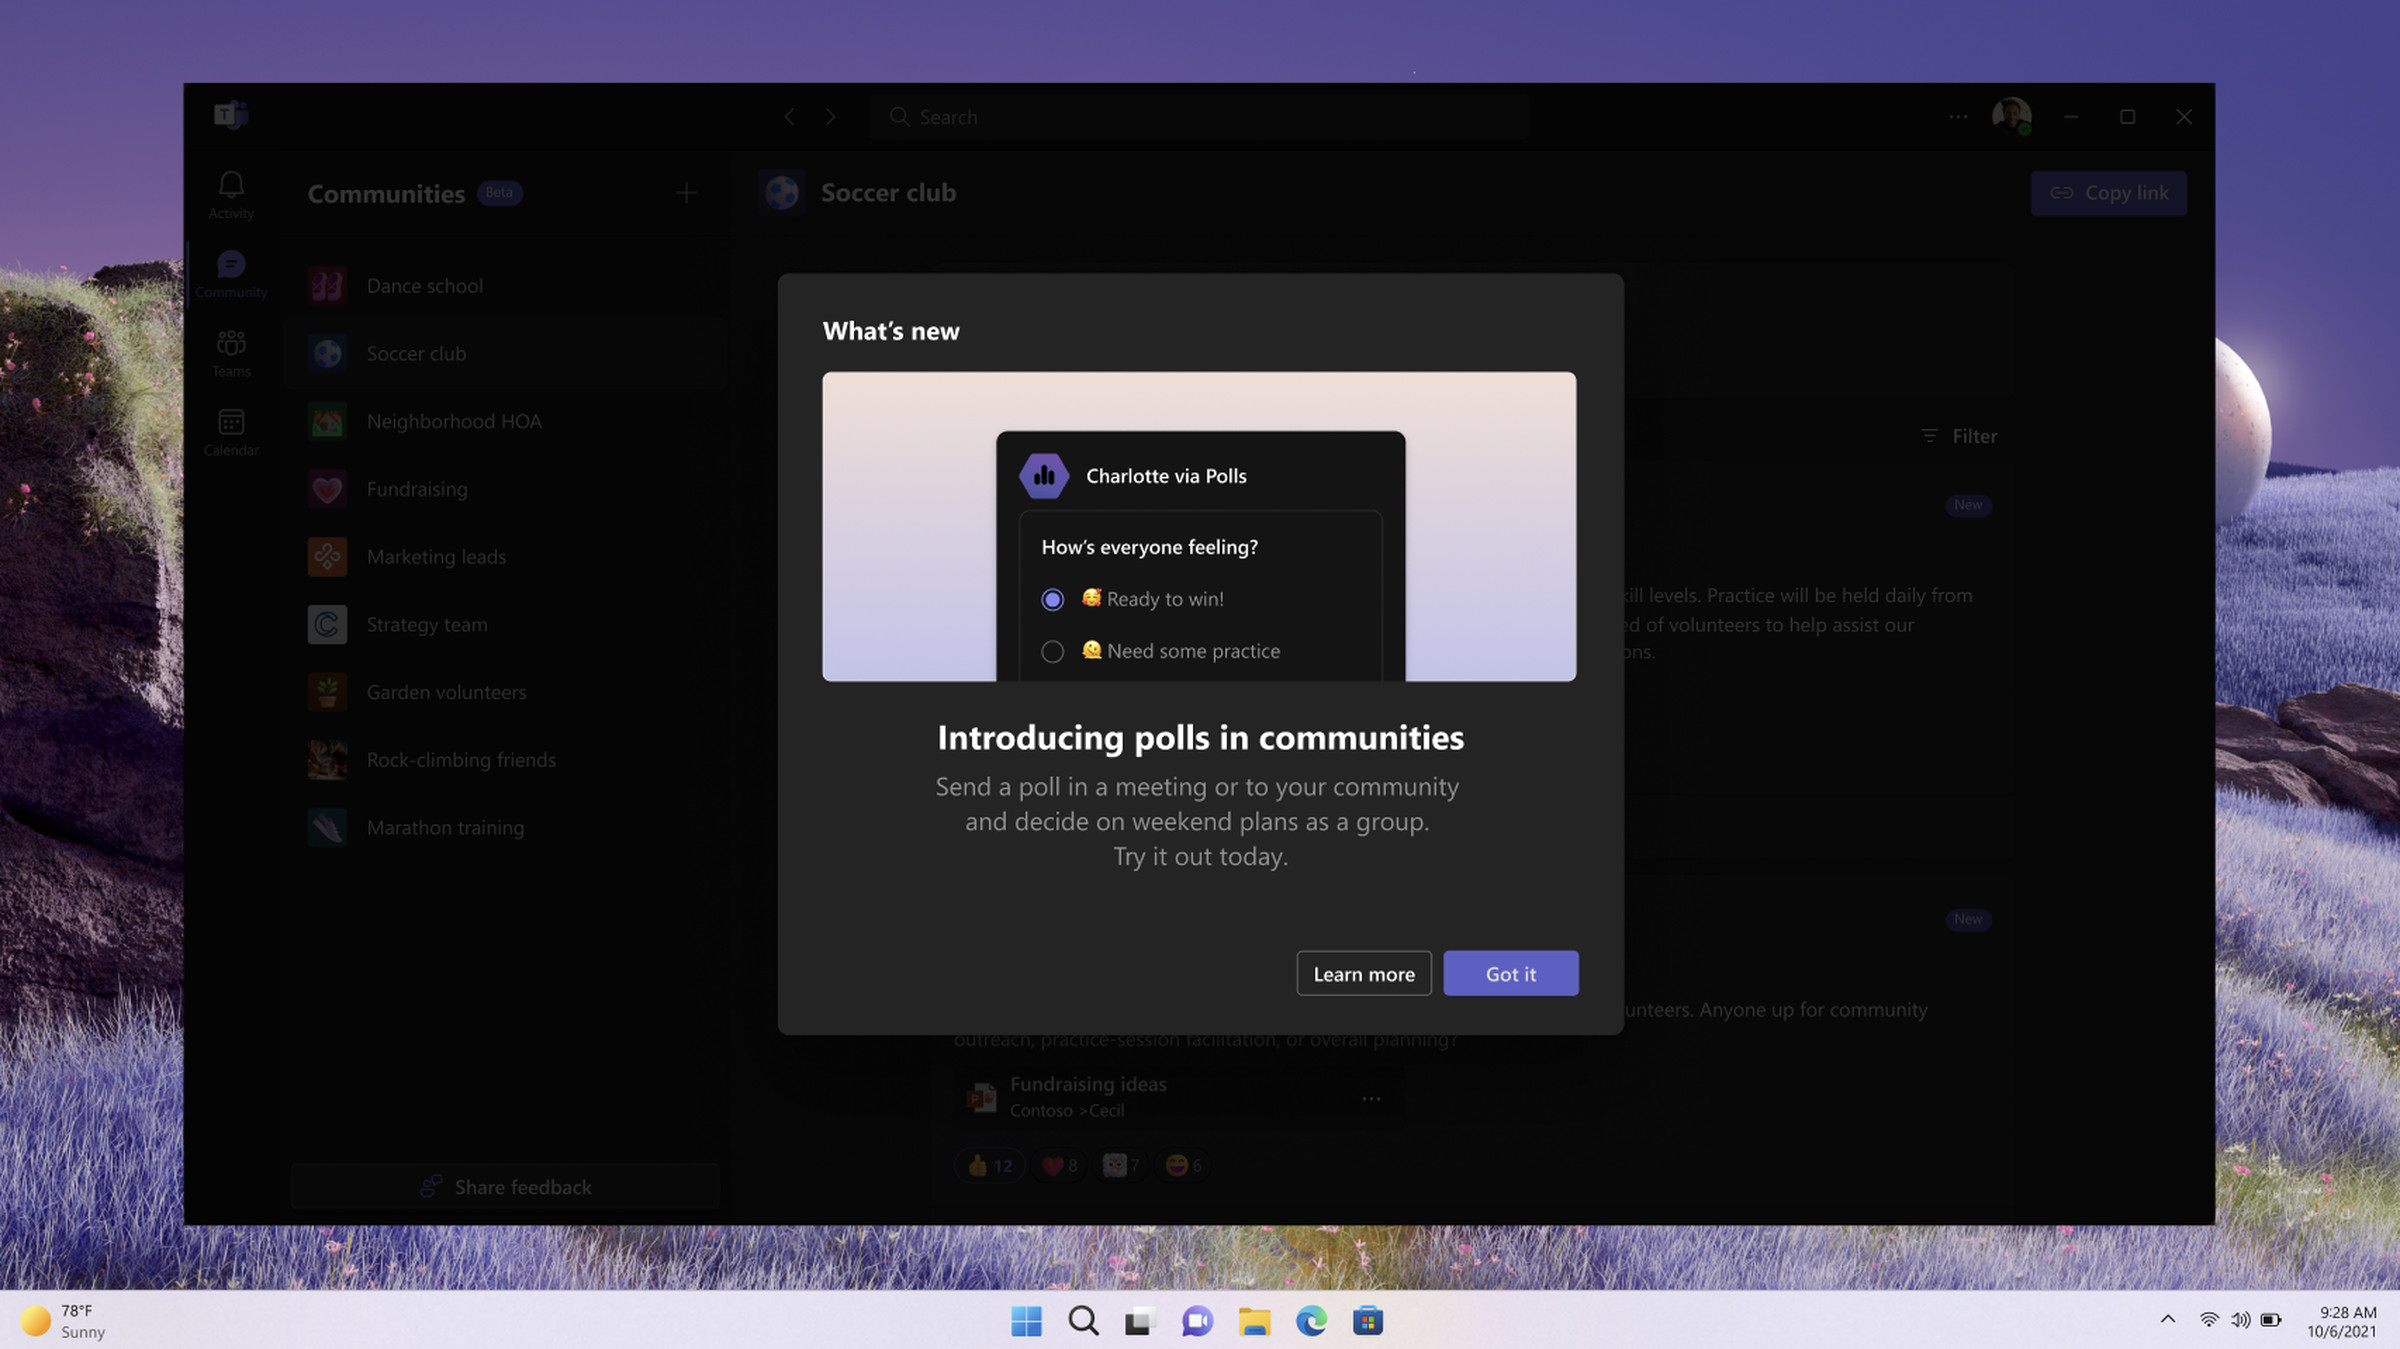 Polls are also coming to Microsoft Teams communities.